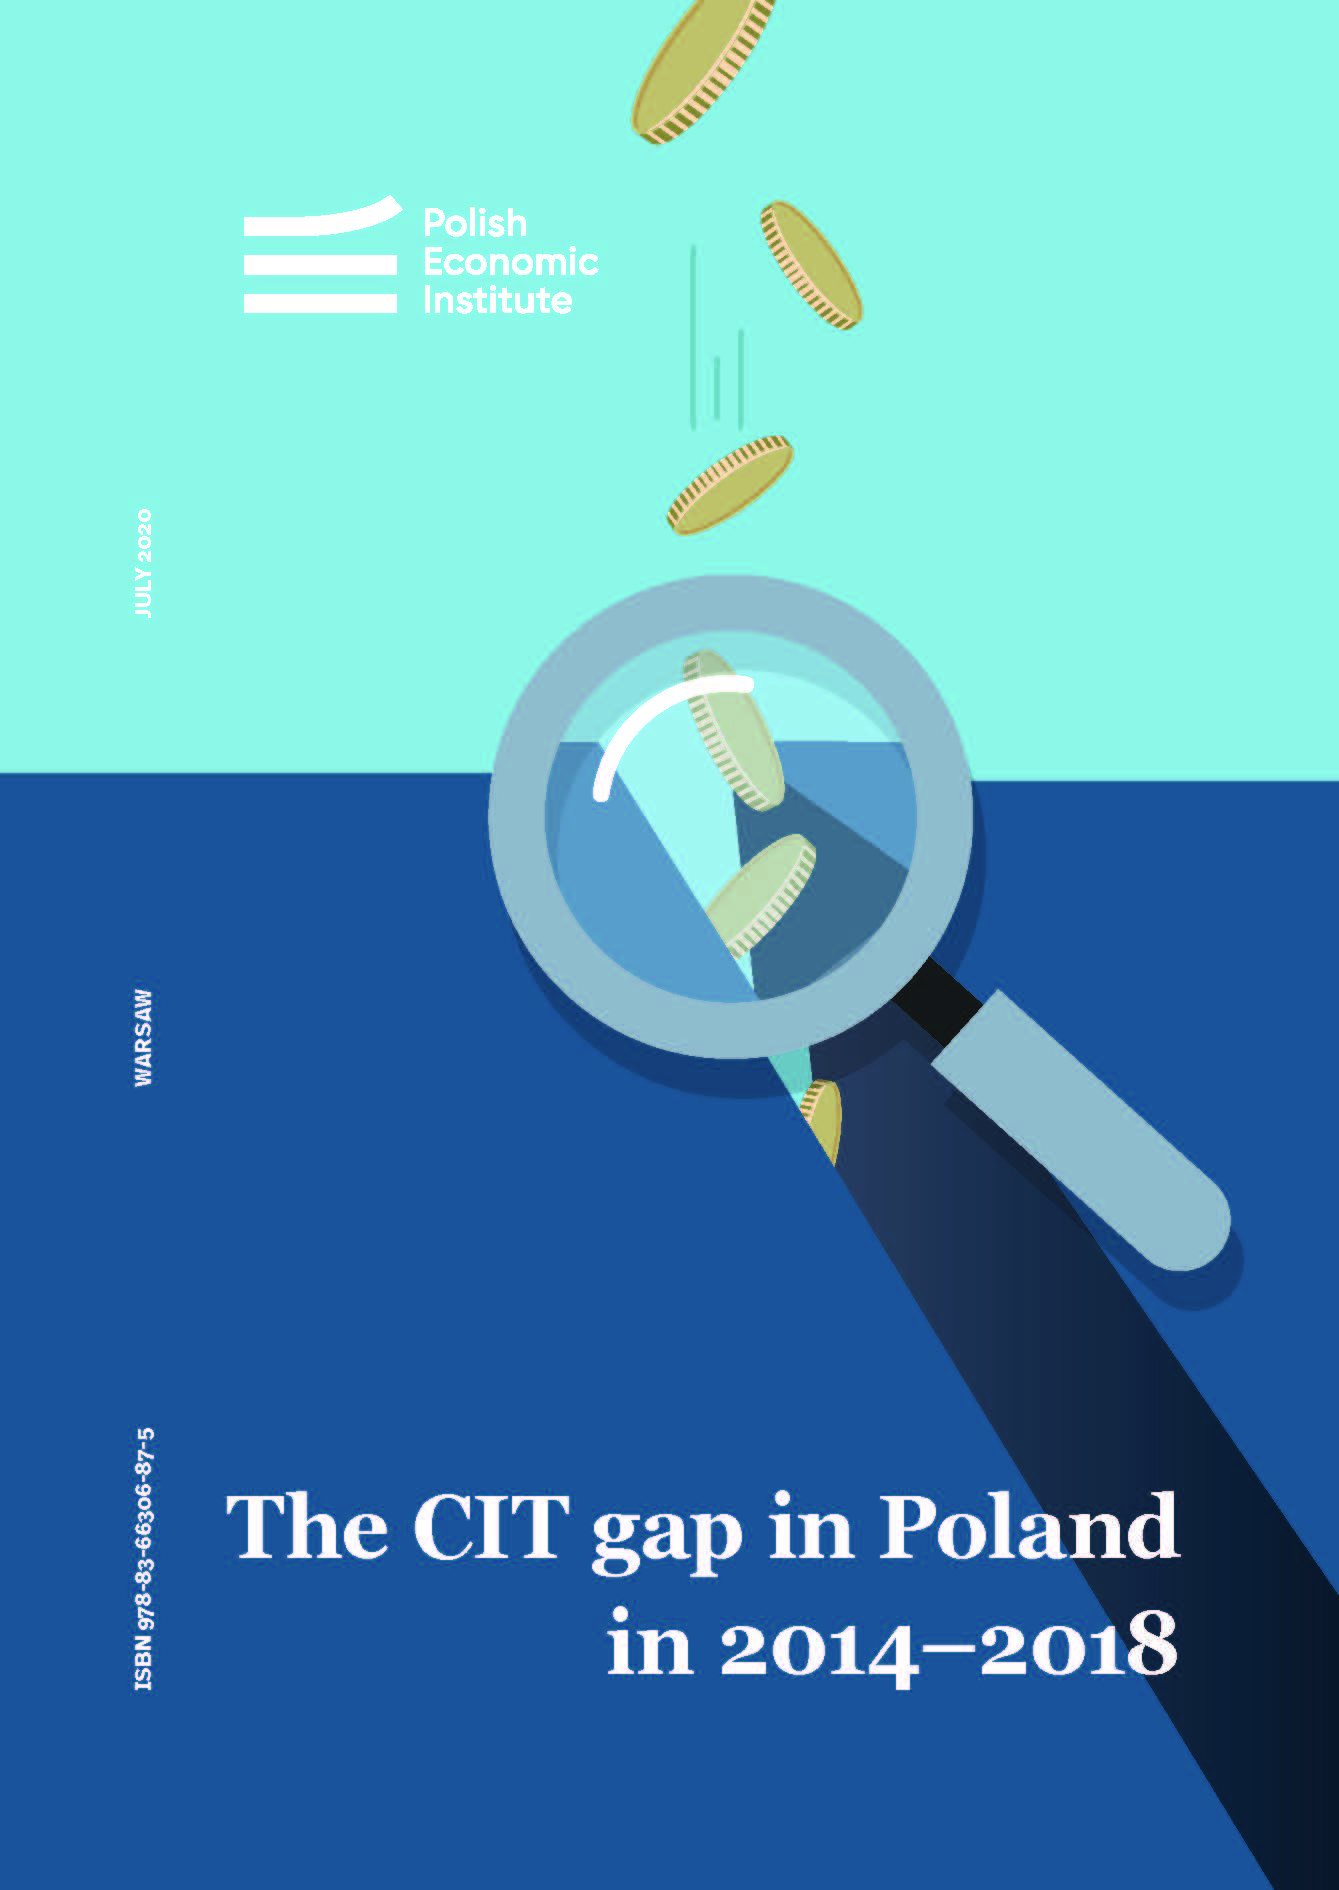 In 2018, the CIT gap was PLN 22 billion – Poland’s annual spending on maintaining the police force